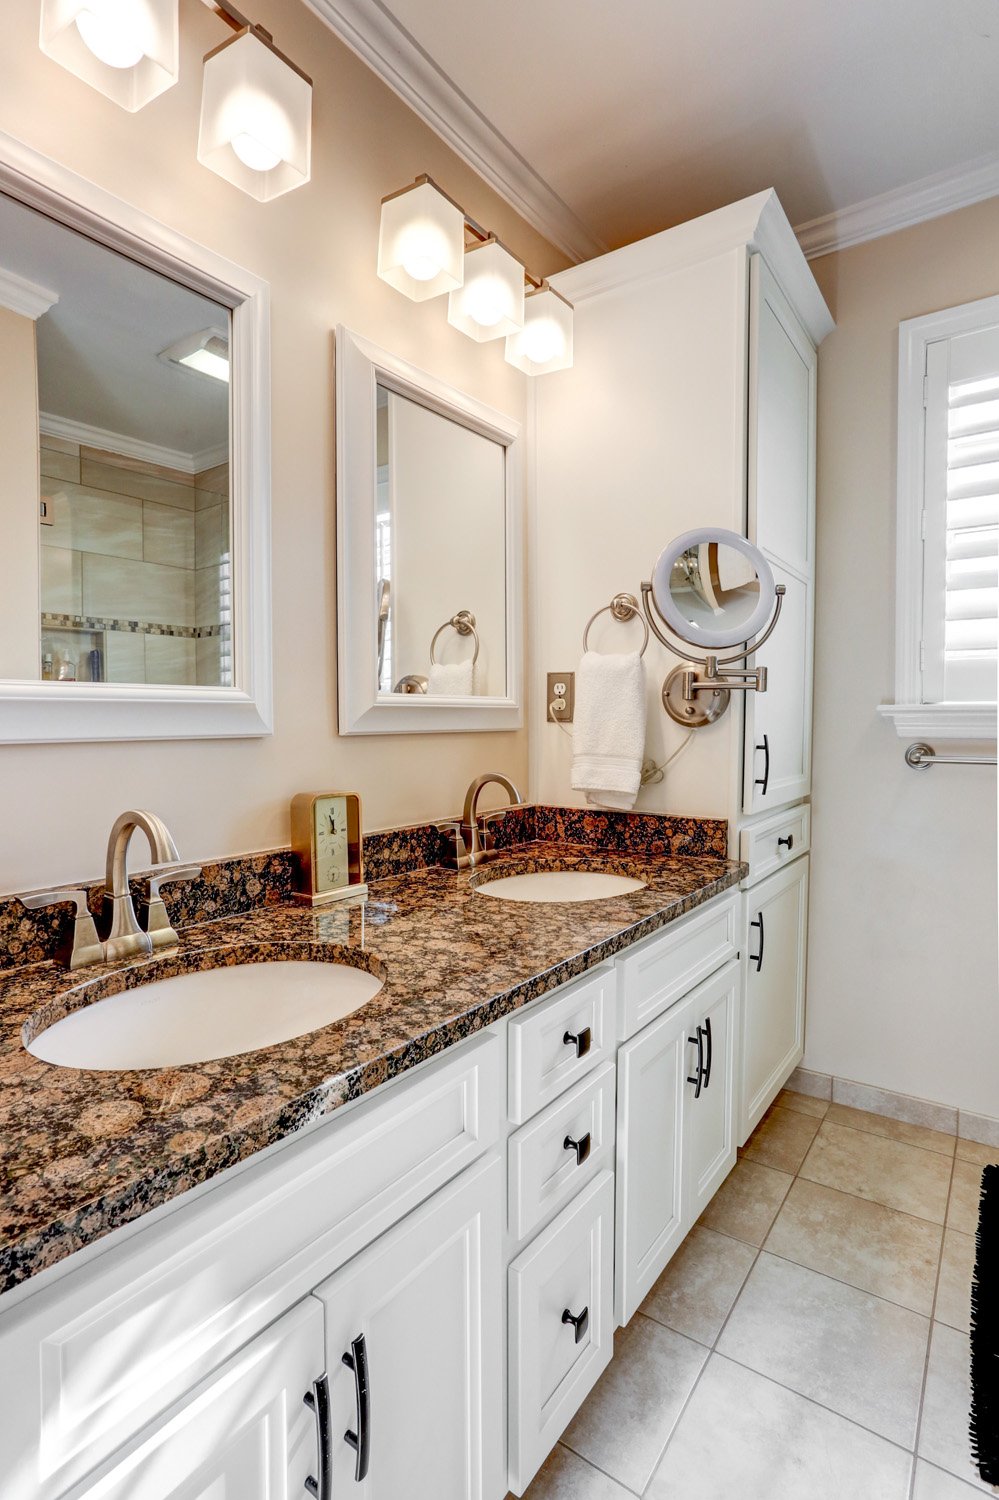 Manehim Central Master Bathroom with updated cabinets and hardware